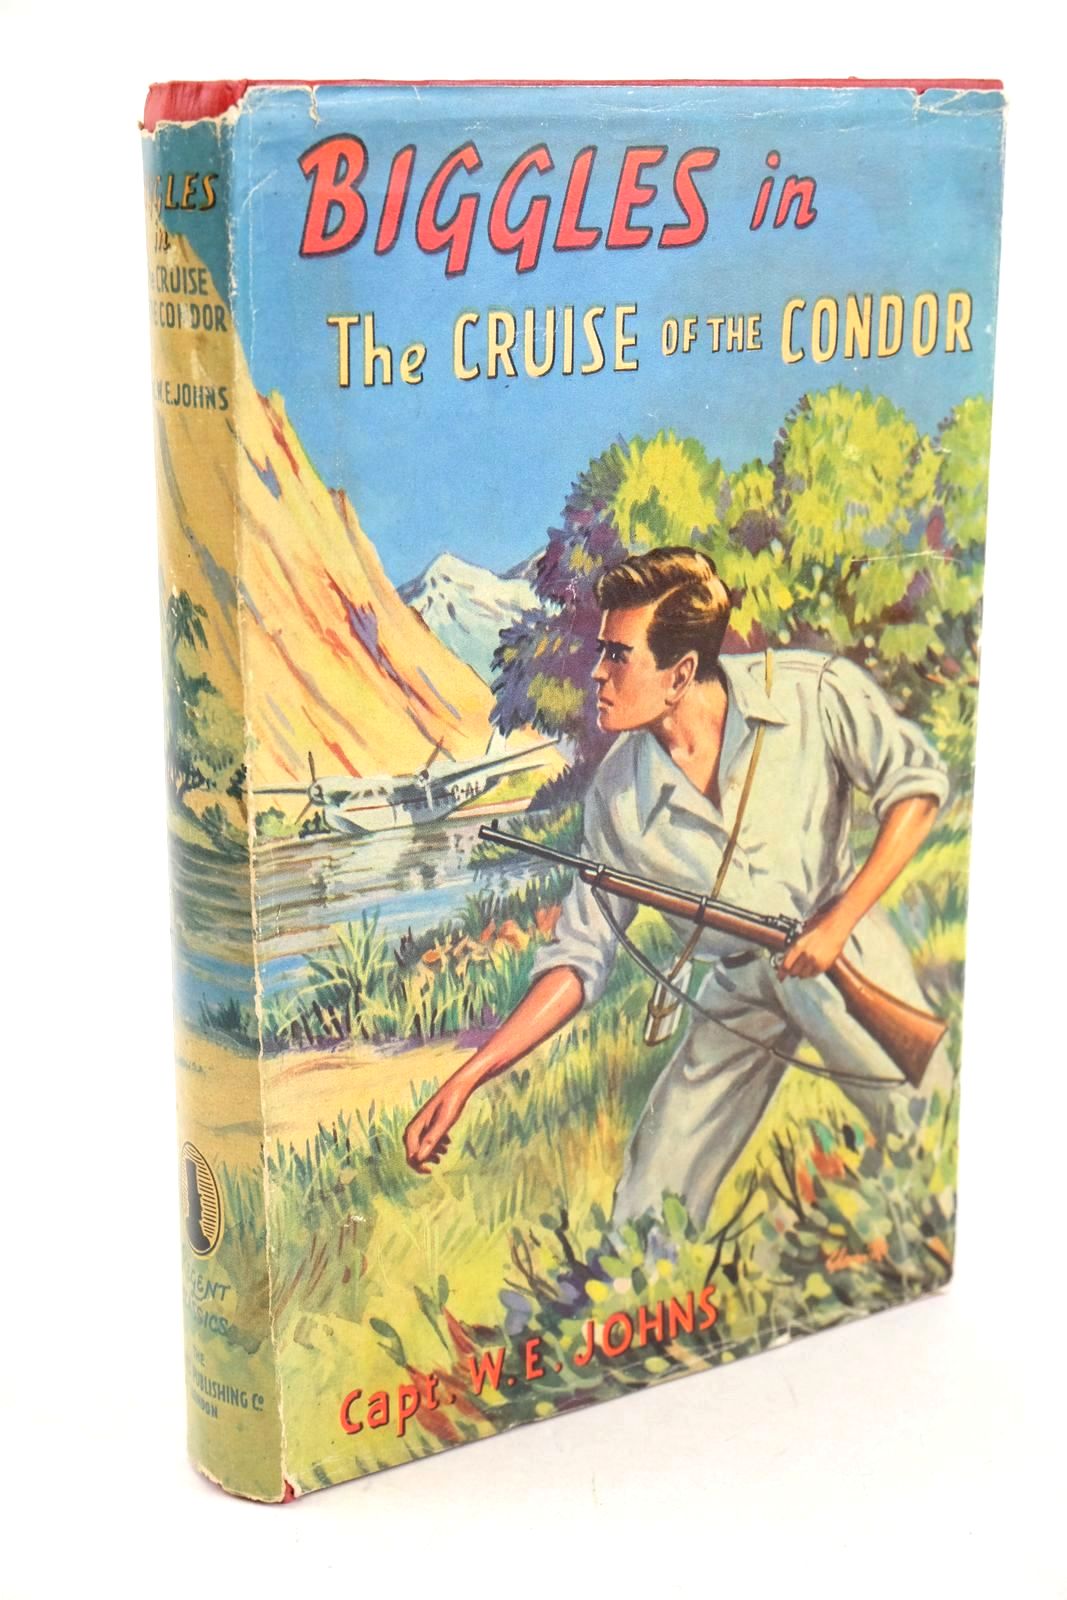 Photo of BIGGLES IN THE CRUISE OF THE CONDOR written by Johns, W.E. published by Thames Publishing Co. (STOCK CODE: 1327201)  for sale by Stella & Rose's Books